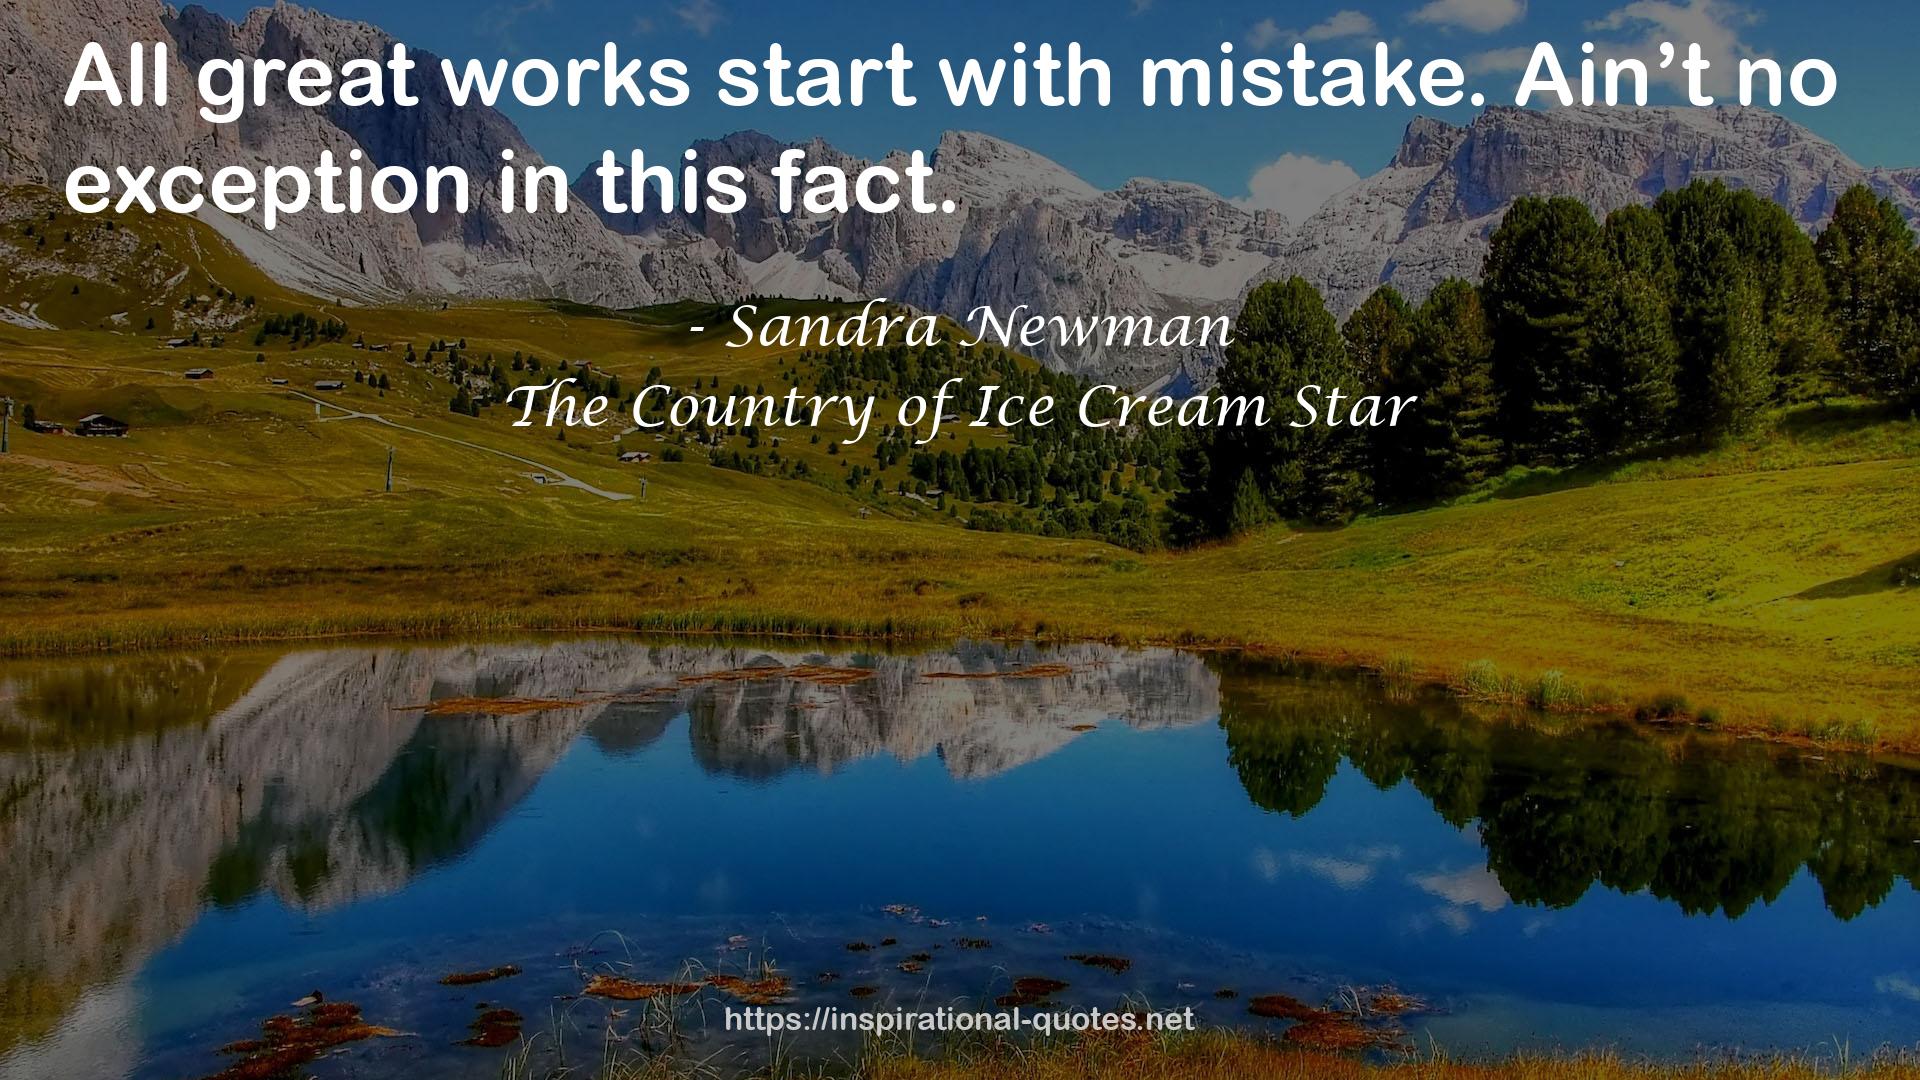 The Country of Ice Cream Star QUOTES